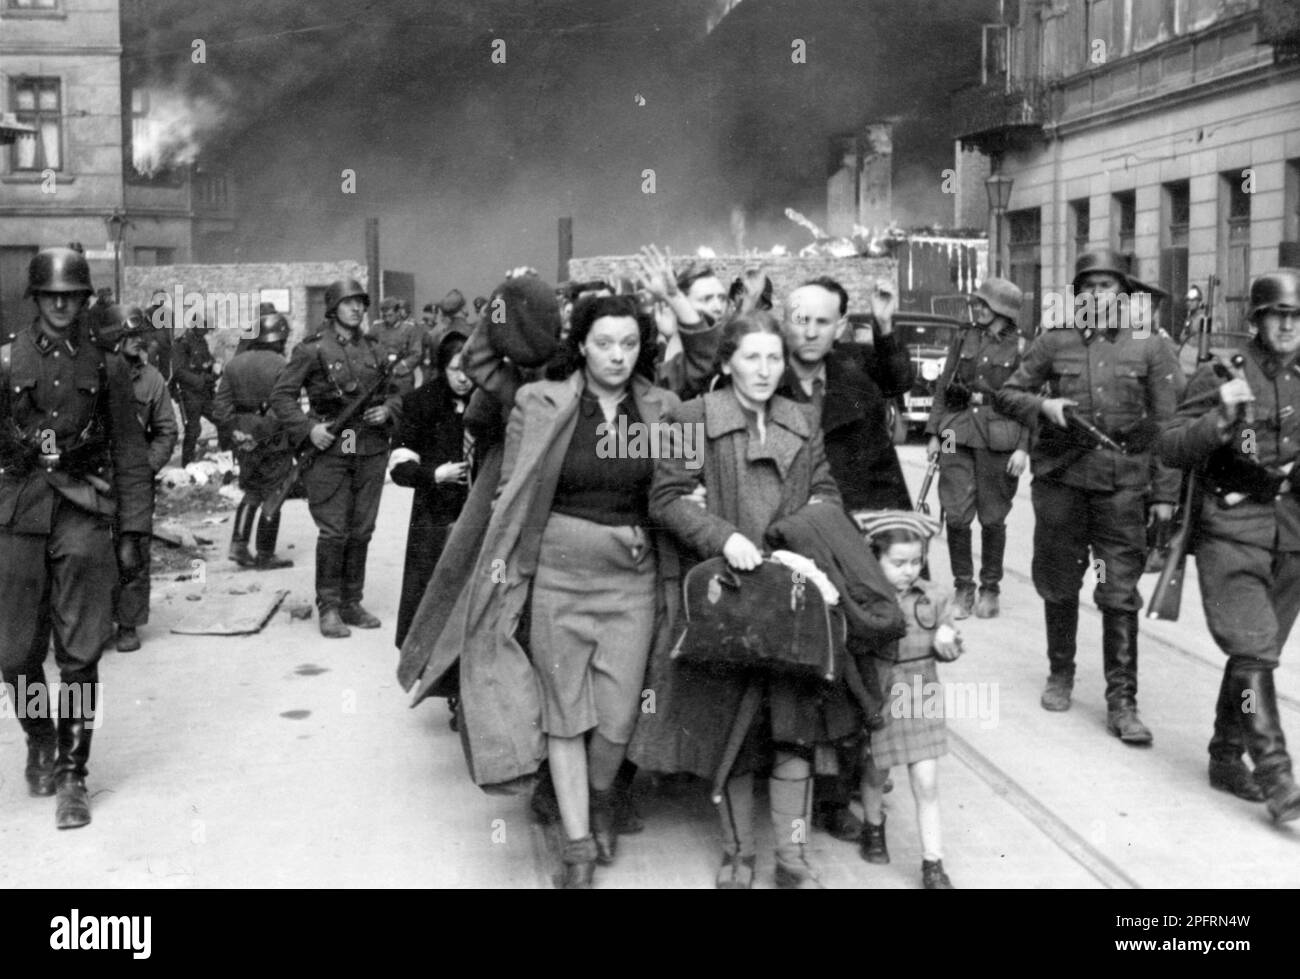 In January 1943 the nazis arrived to round up the Jews of the Warsaw Ghetto  The Jews, resolved to fight it out, took on the SS with homemade and primitive weapons. The defenders were executed or deported and the Ghetto area was systematically demolished. This event is known as The Ghetto Uprising. This image shows a column of captured women leaving the burning city.  This image is from the German photographic record of the event, known as the Stroop report. Stock Photo